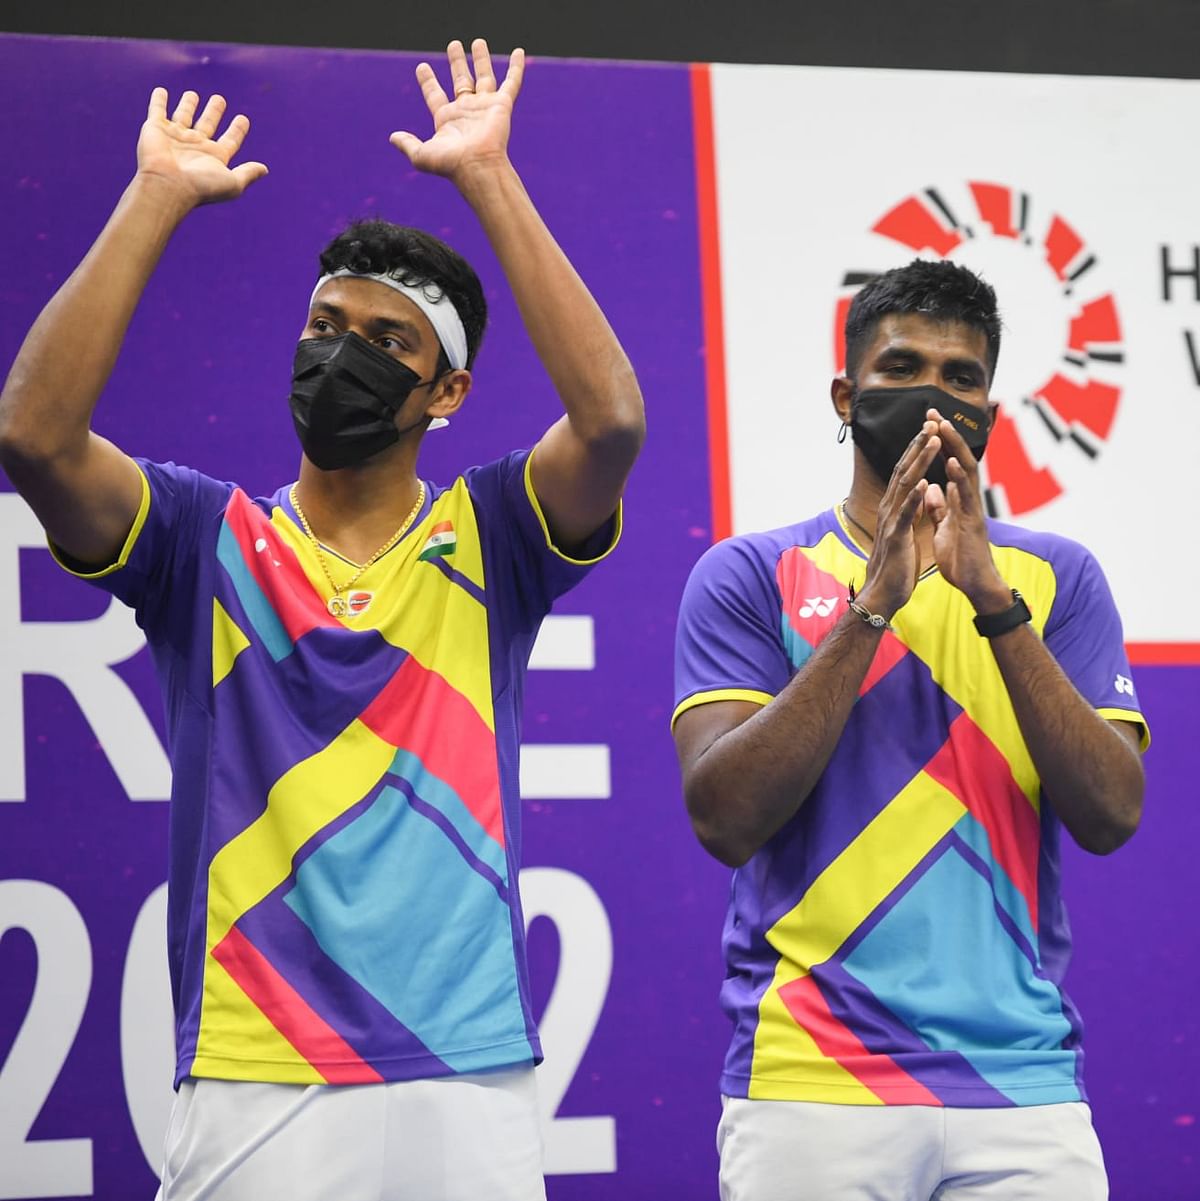 Satwiksairaj Rankireddy and Chirag Shetty defeated the top seeds to win the men's doubles title.